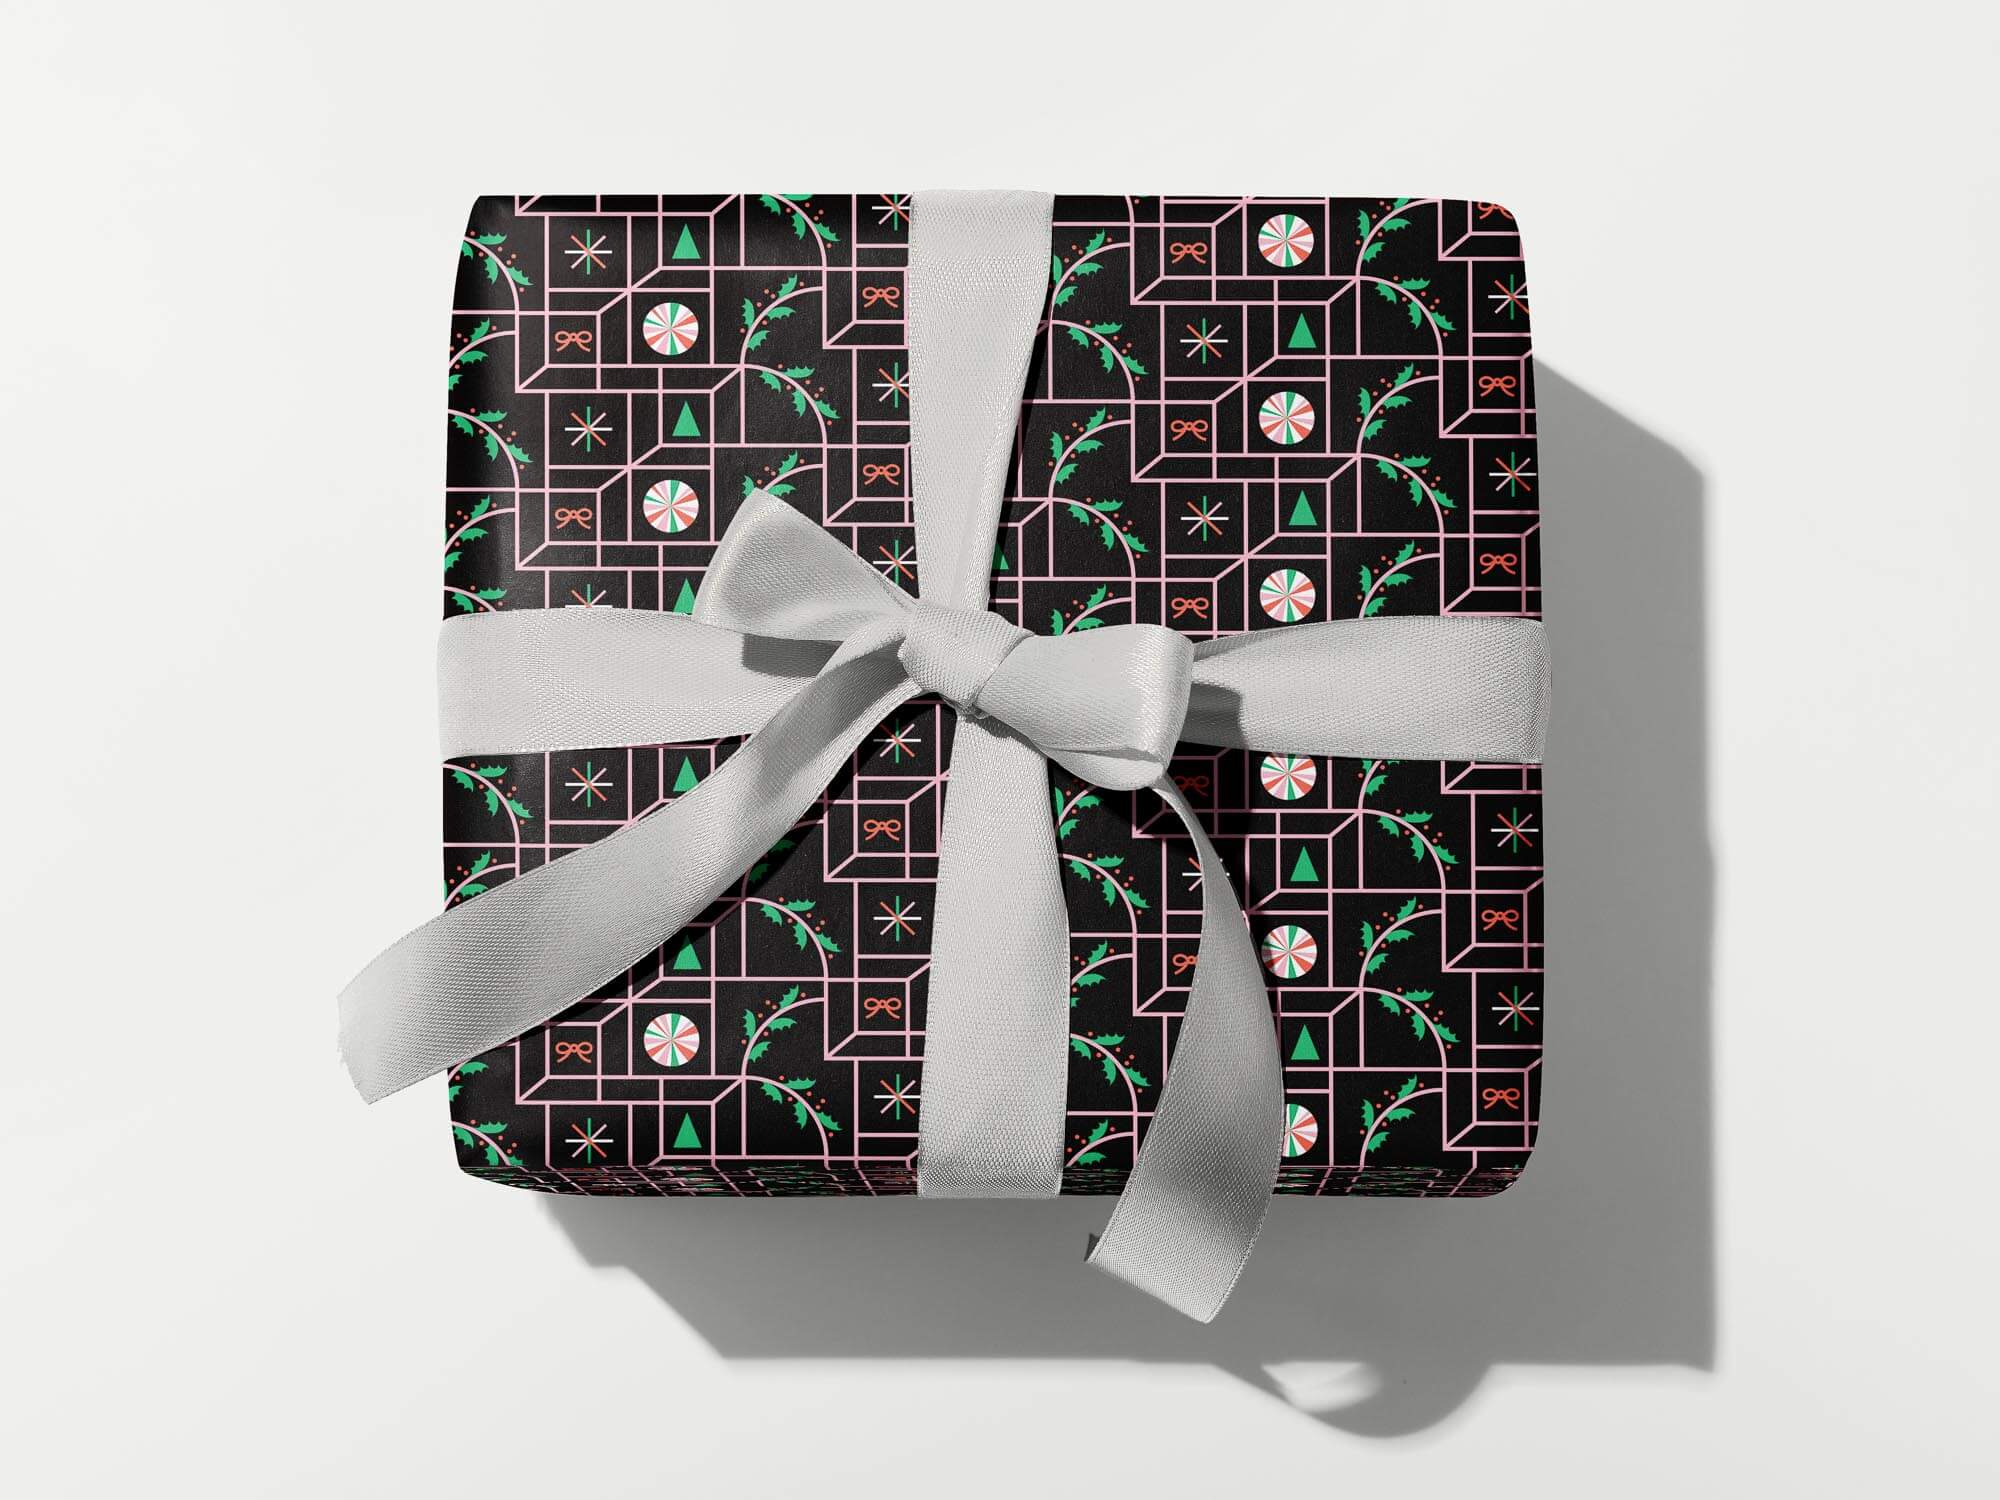 Mid-century and op art inspired optical illusion wrapping paper with pattern of peppermints, holly, bows, Christmas trees, and twinkly stars.